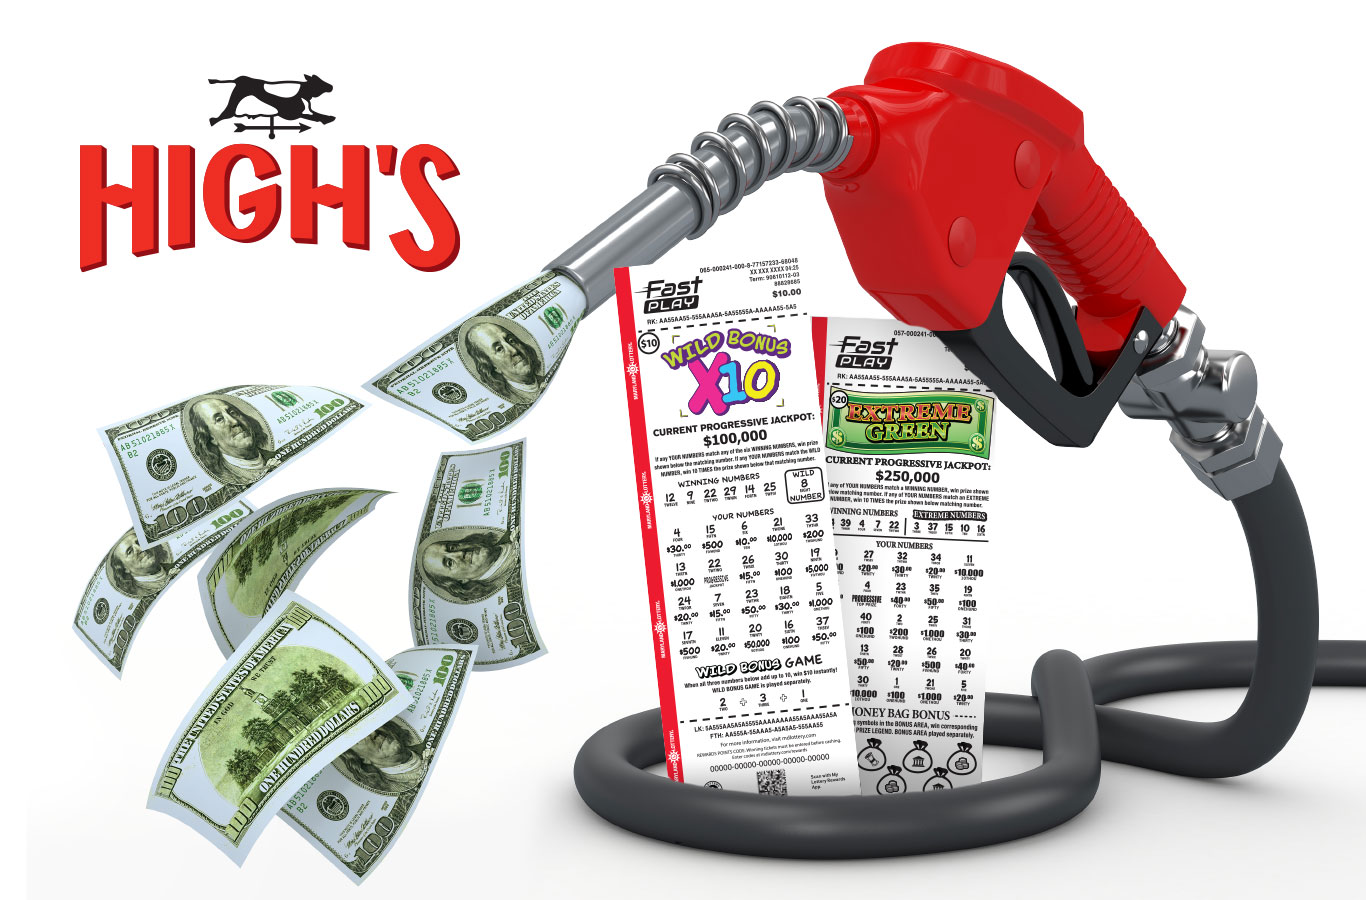 Pump up the savings! You could win up to $1,000 in free gas at High's with the purchase of any $10, $20, or $30 FAST PLAY ticket from July 31st – September 4th.